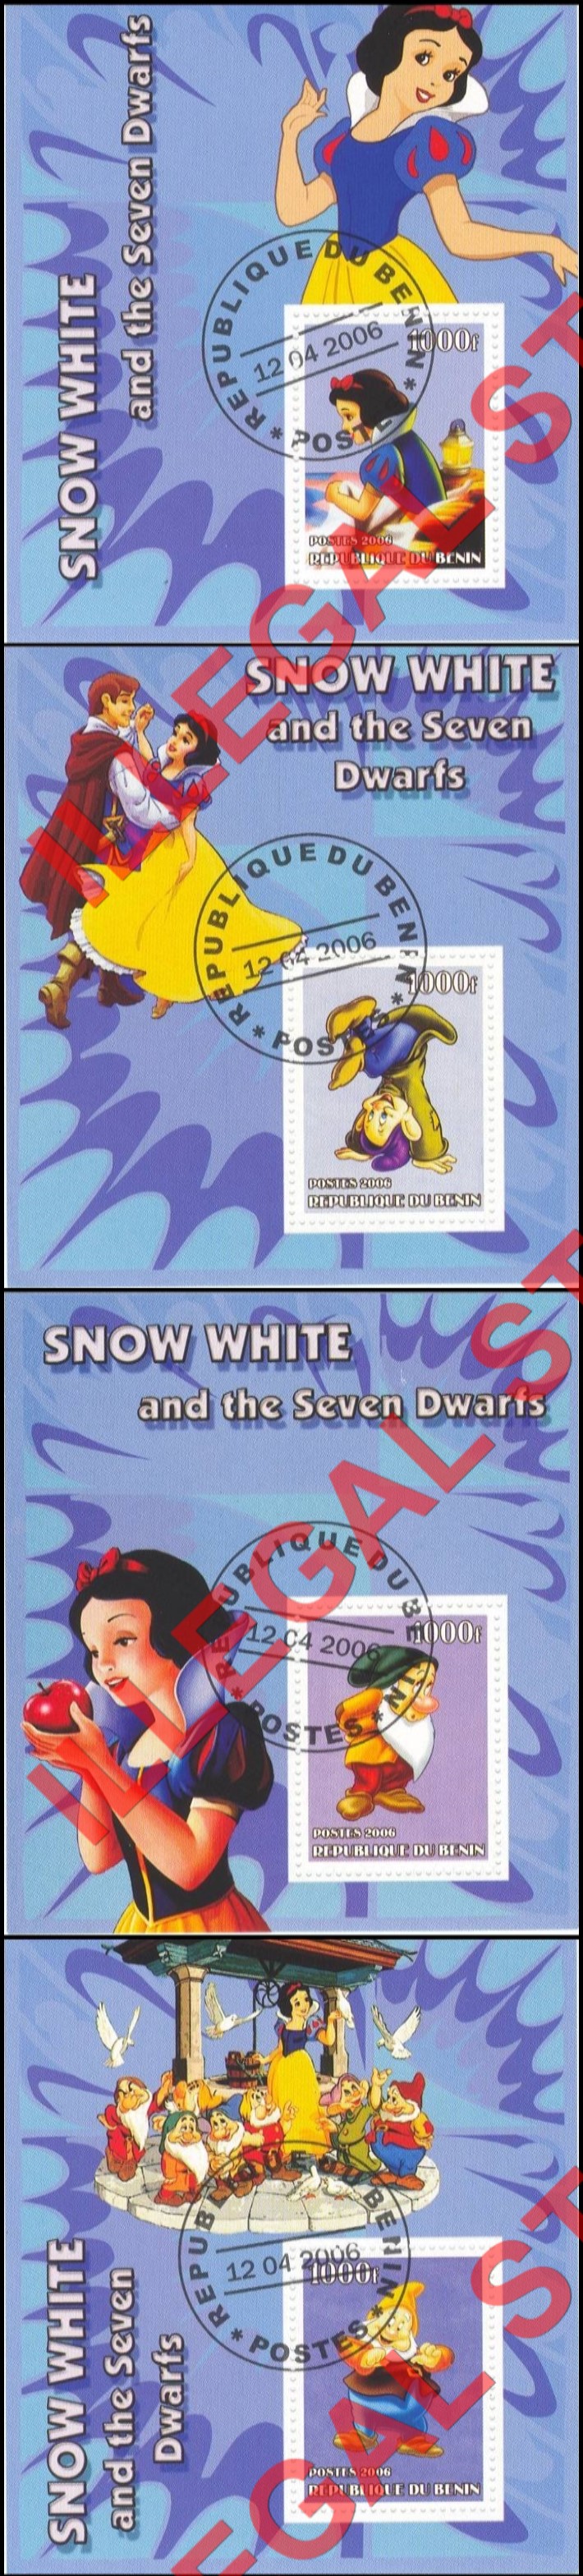 Benin 2006 Snow White and the Seven Dwarfs Illegal Stamp Souvenir Sheets of 1 (Part 1)